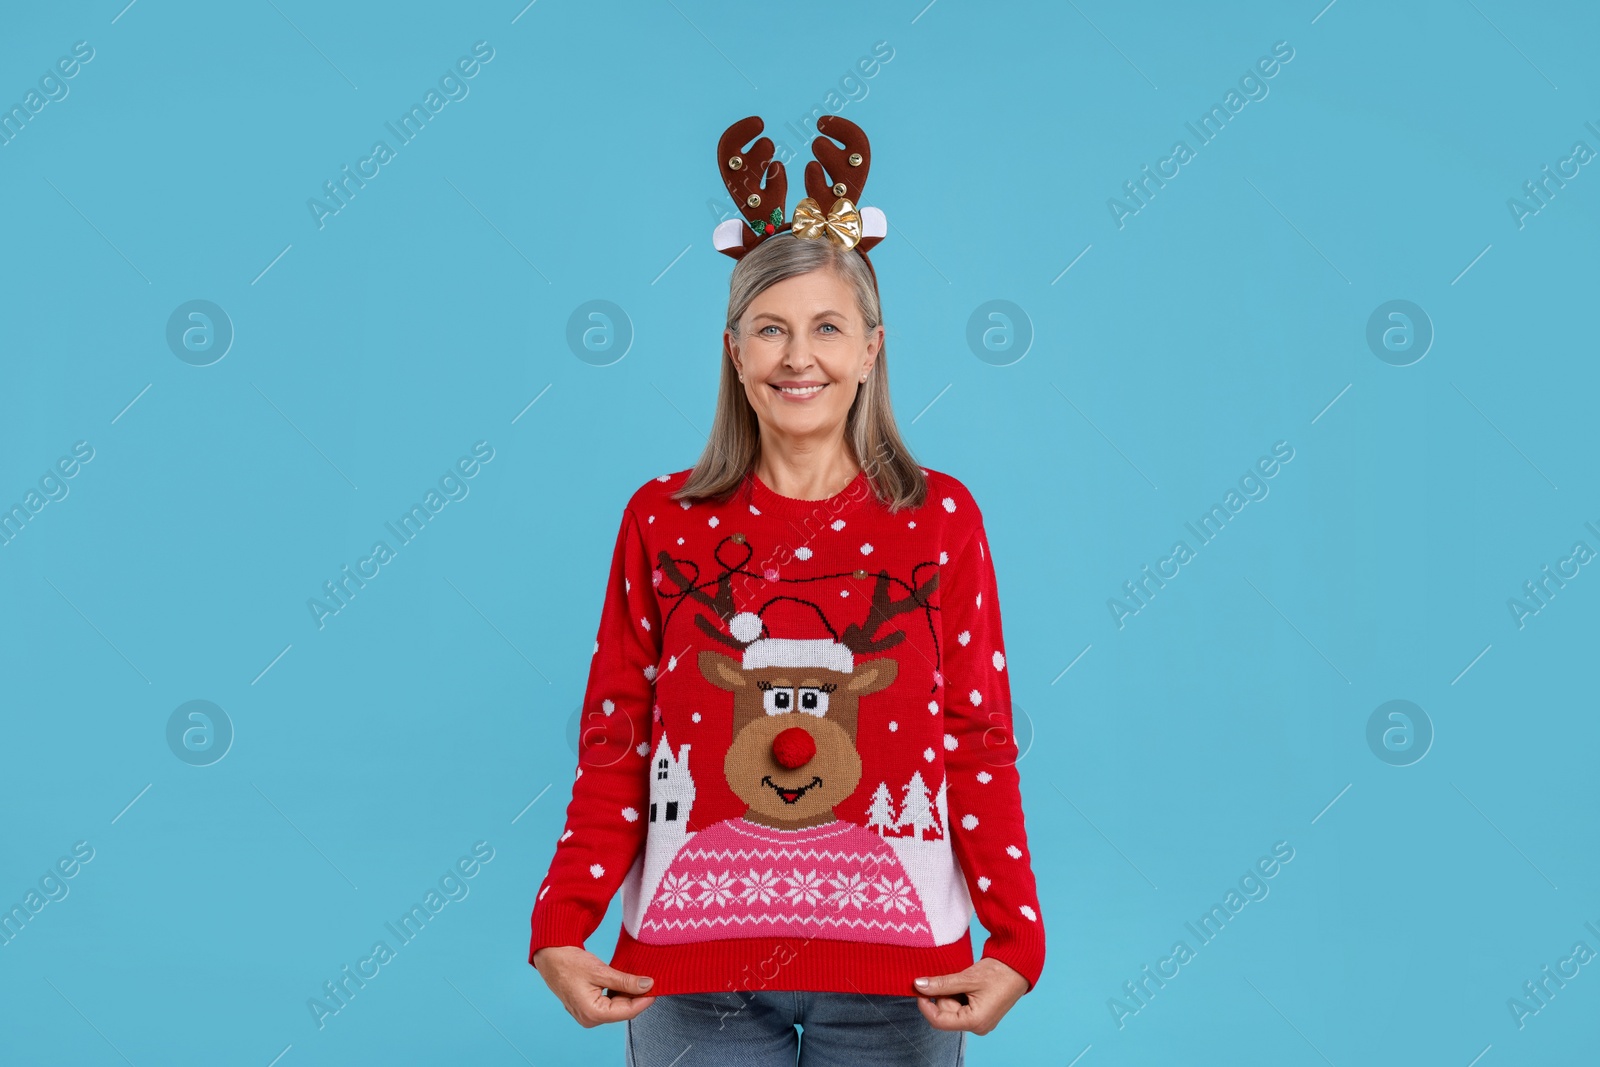 Photo of Happy senior woman in reindeer headband showing Christmas sweater on light blue background